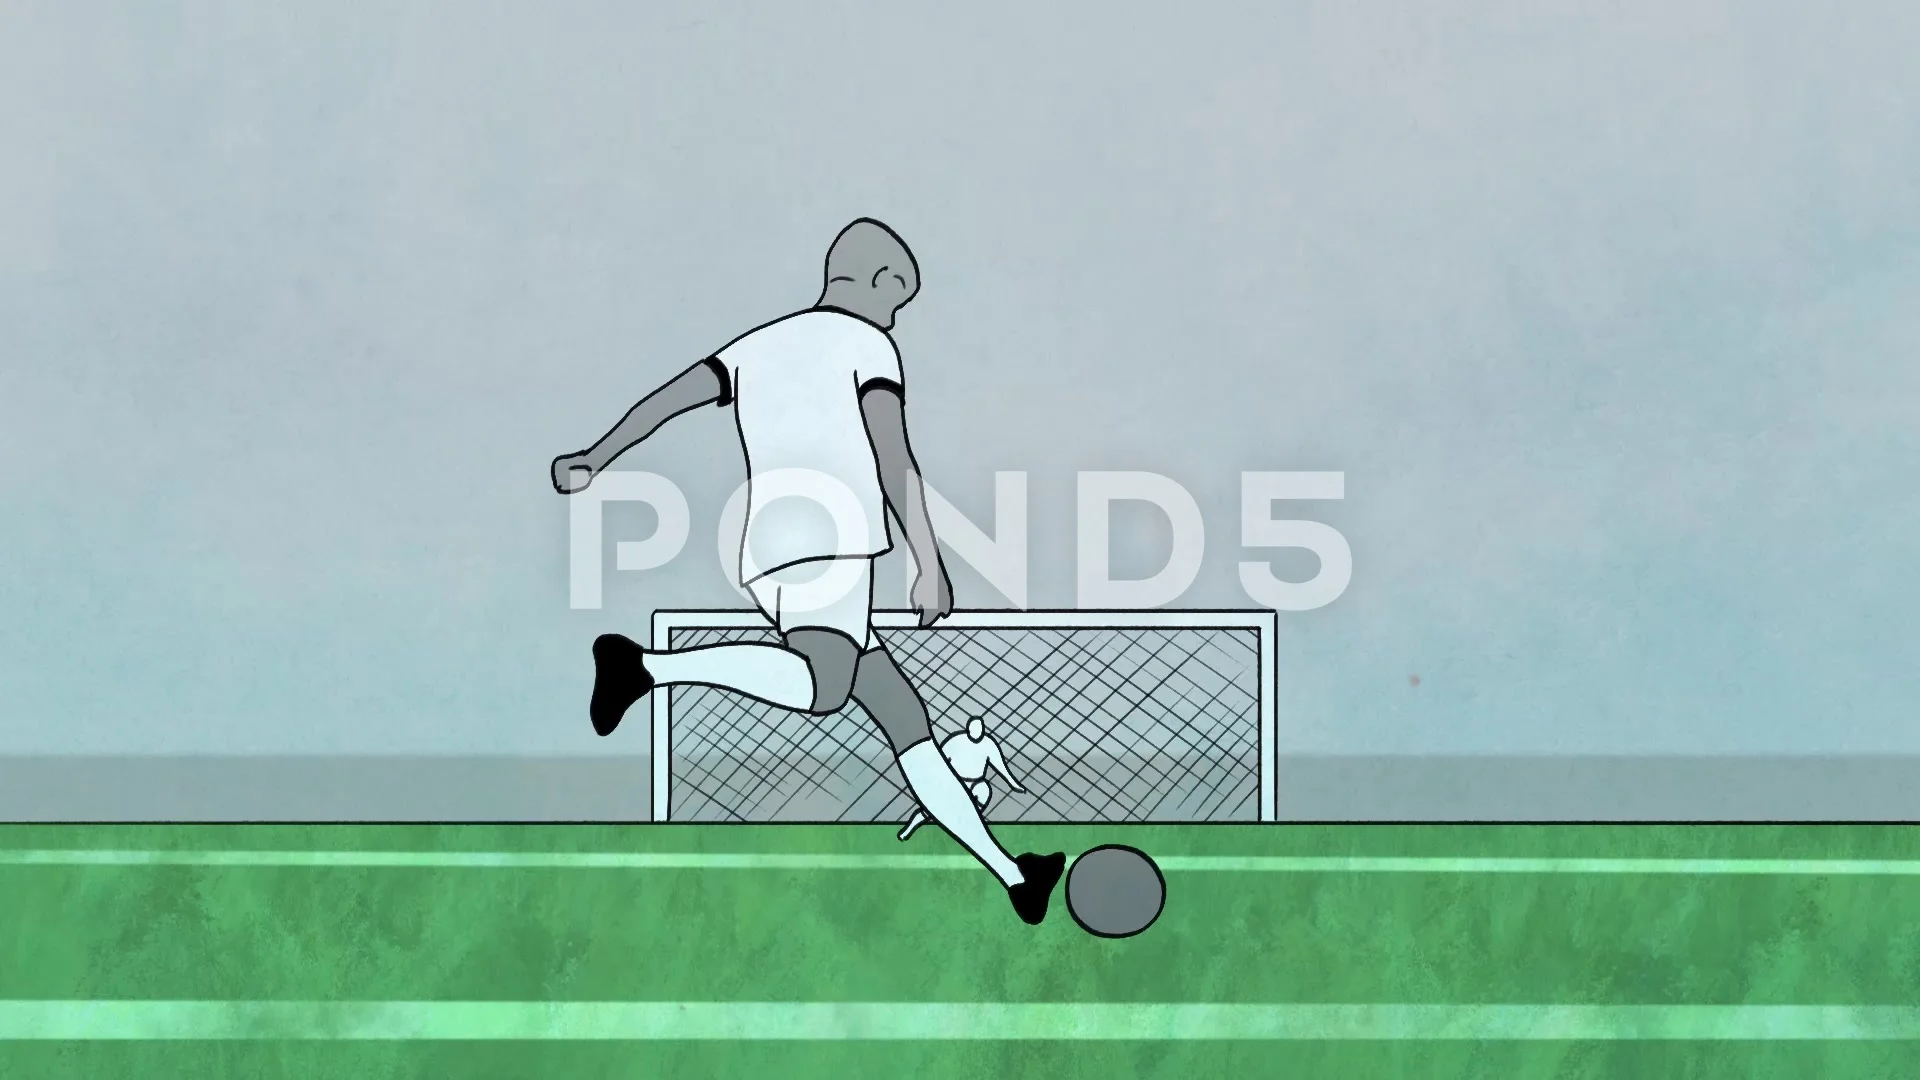 soccer player animated